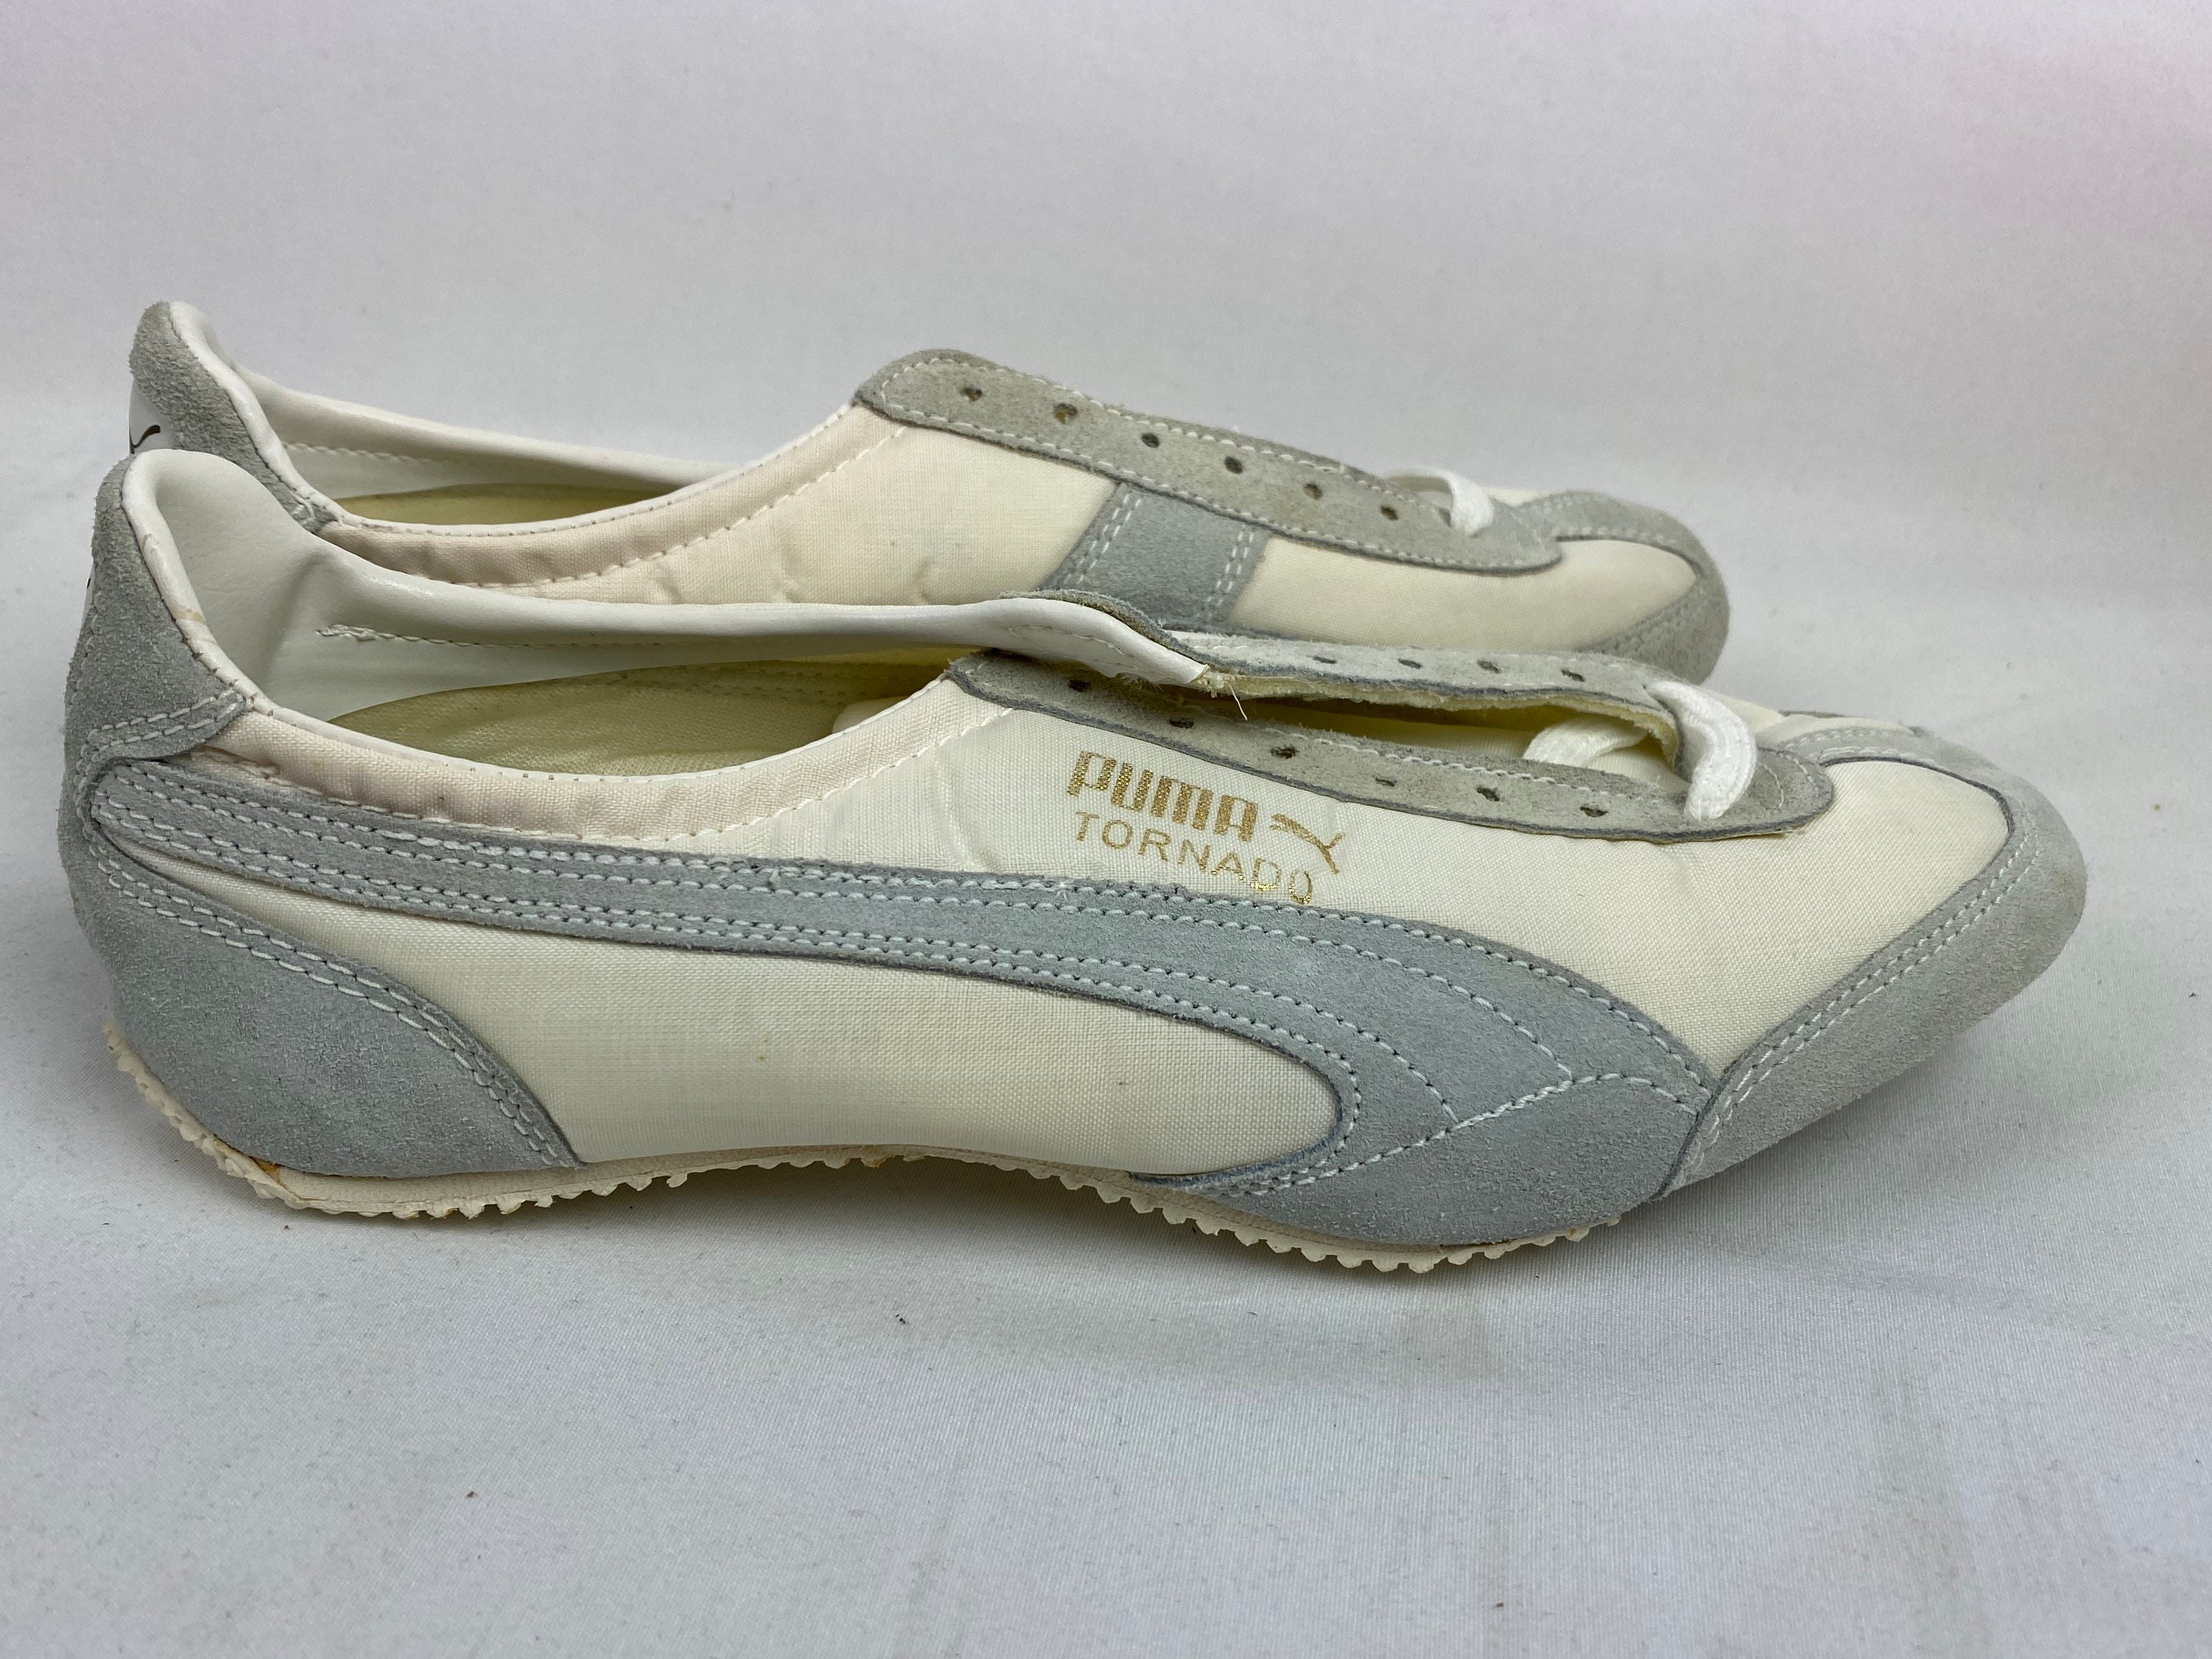 Vintage 70s Puma Tornado Track Shoes White Spikes Deadstock - Etsy